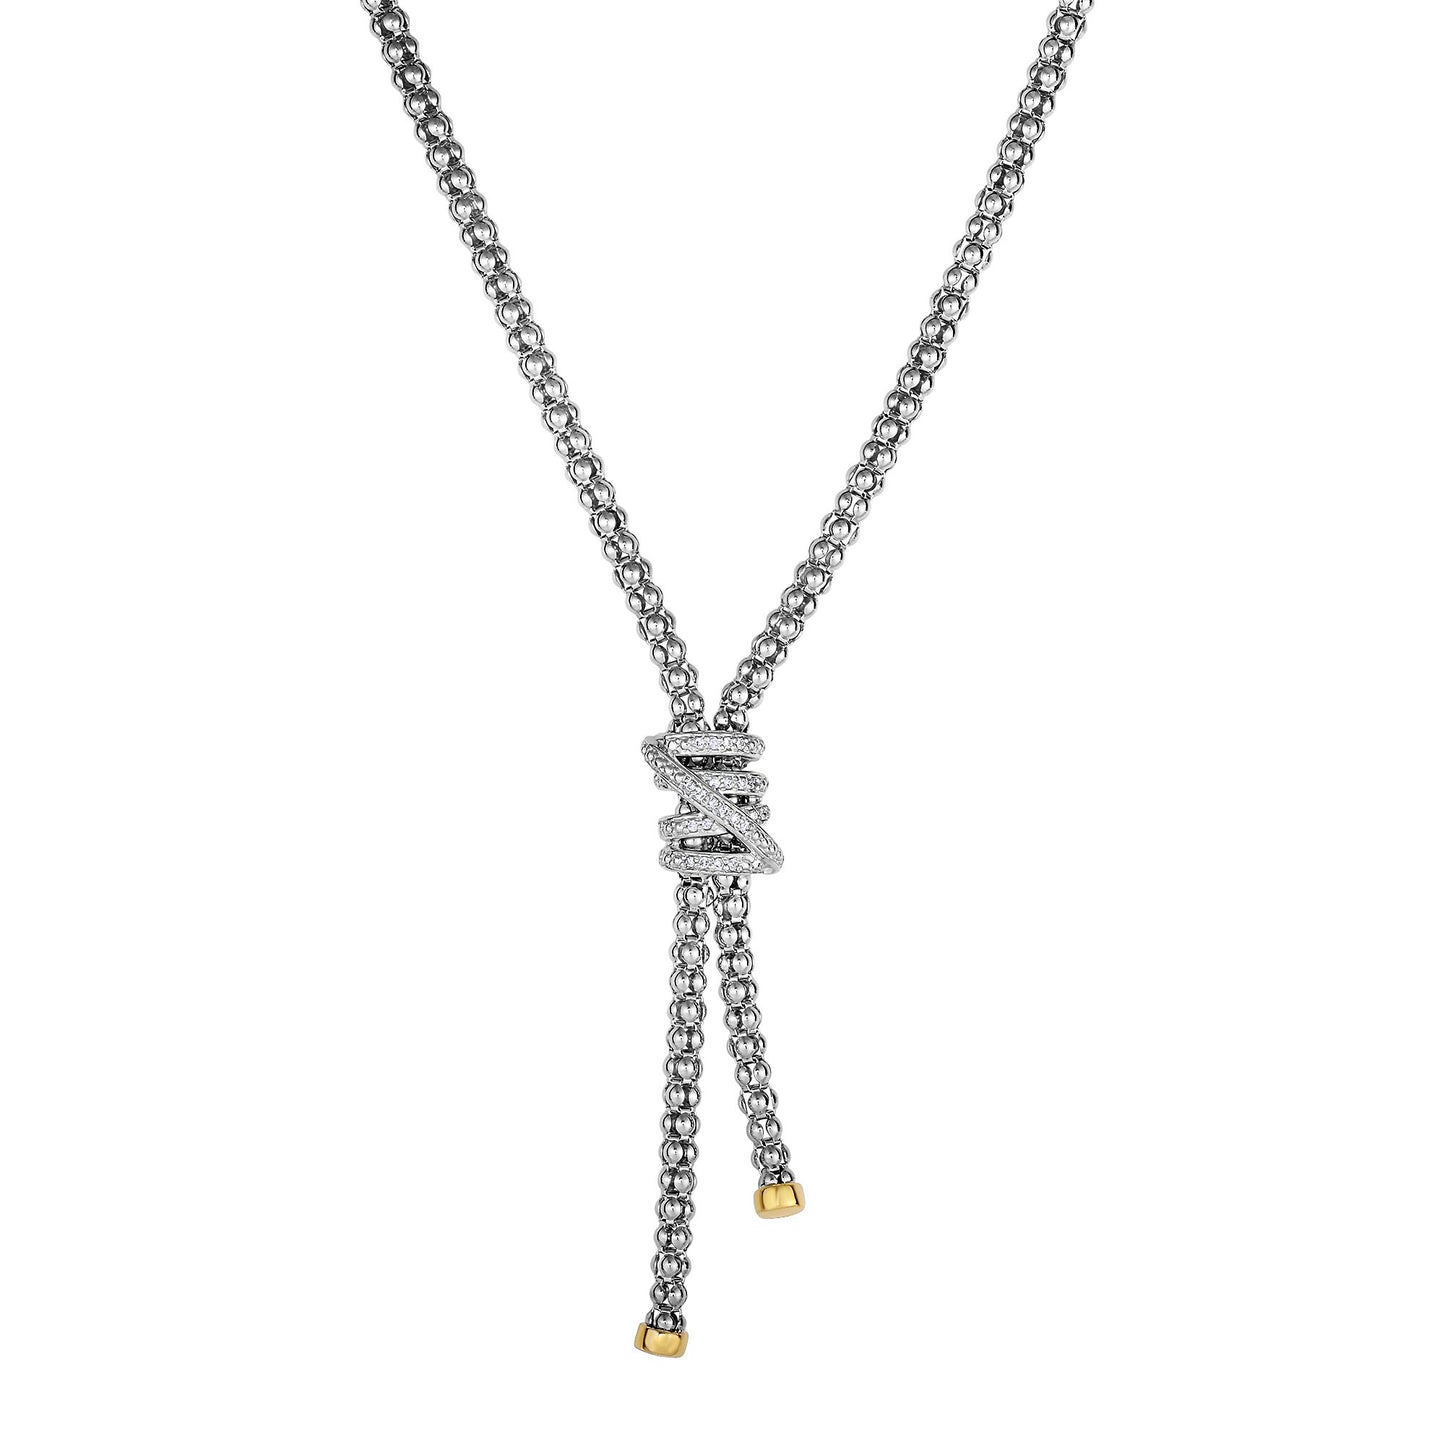 18K Gold & Sterling Silver and Diamonds with Popcorn Textured Lariet Style Necklace